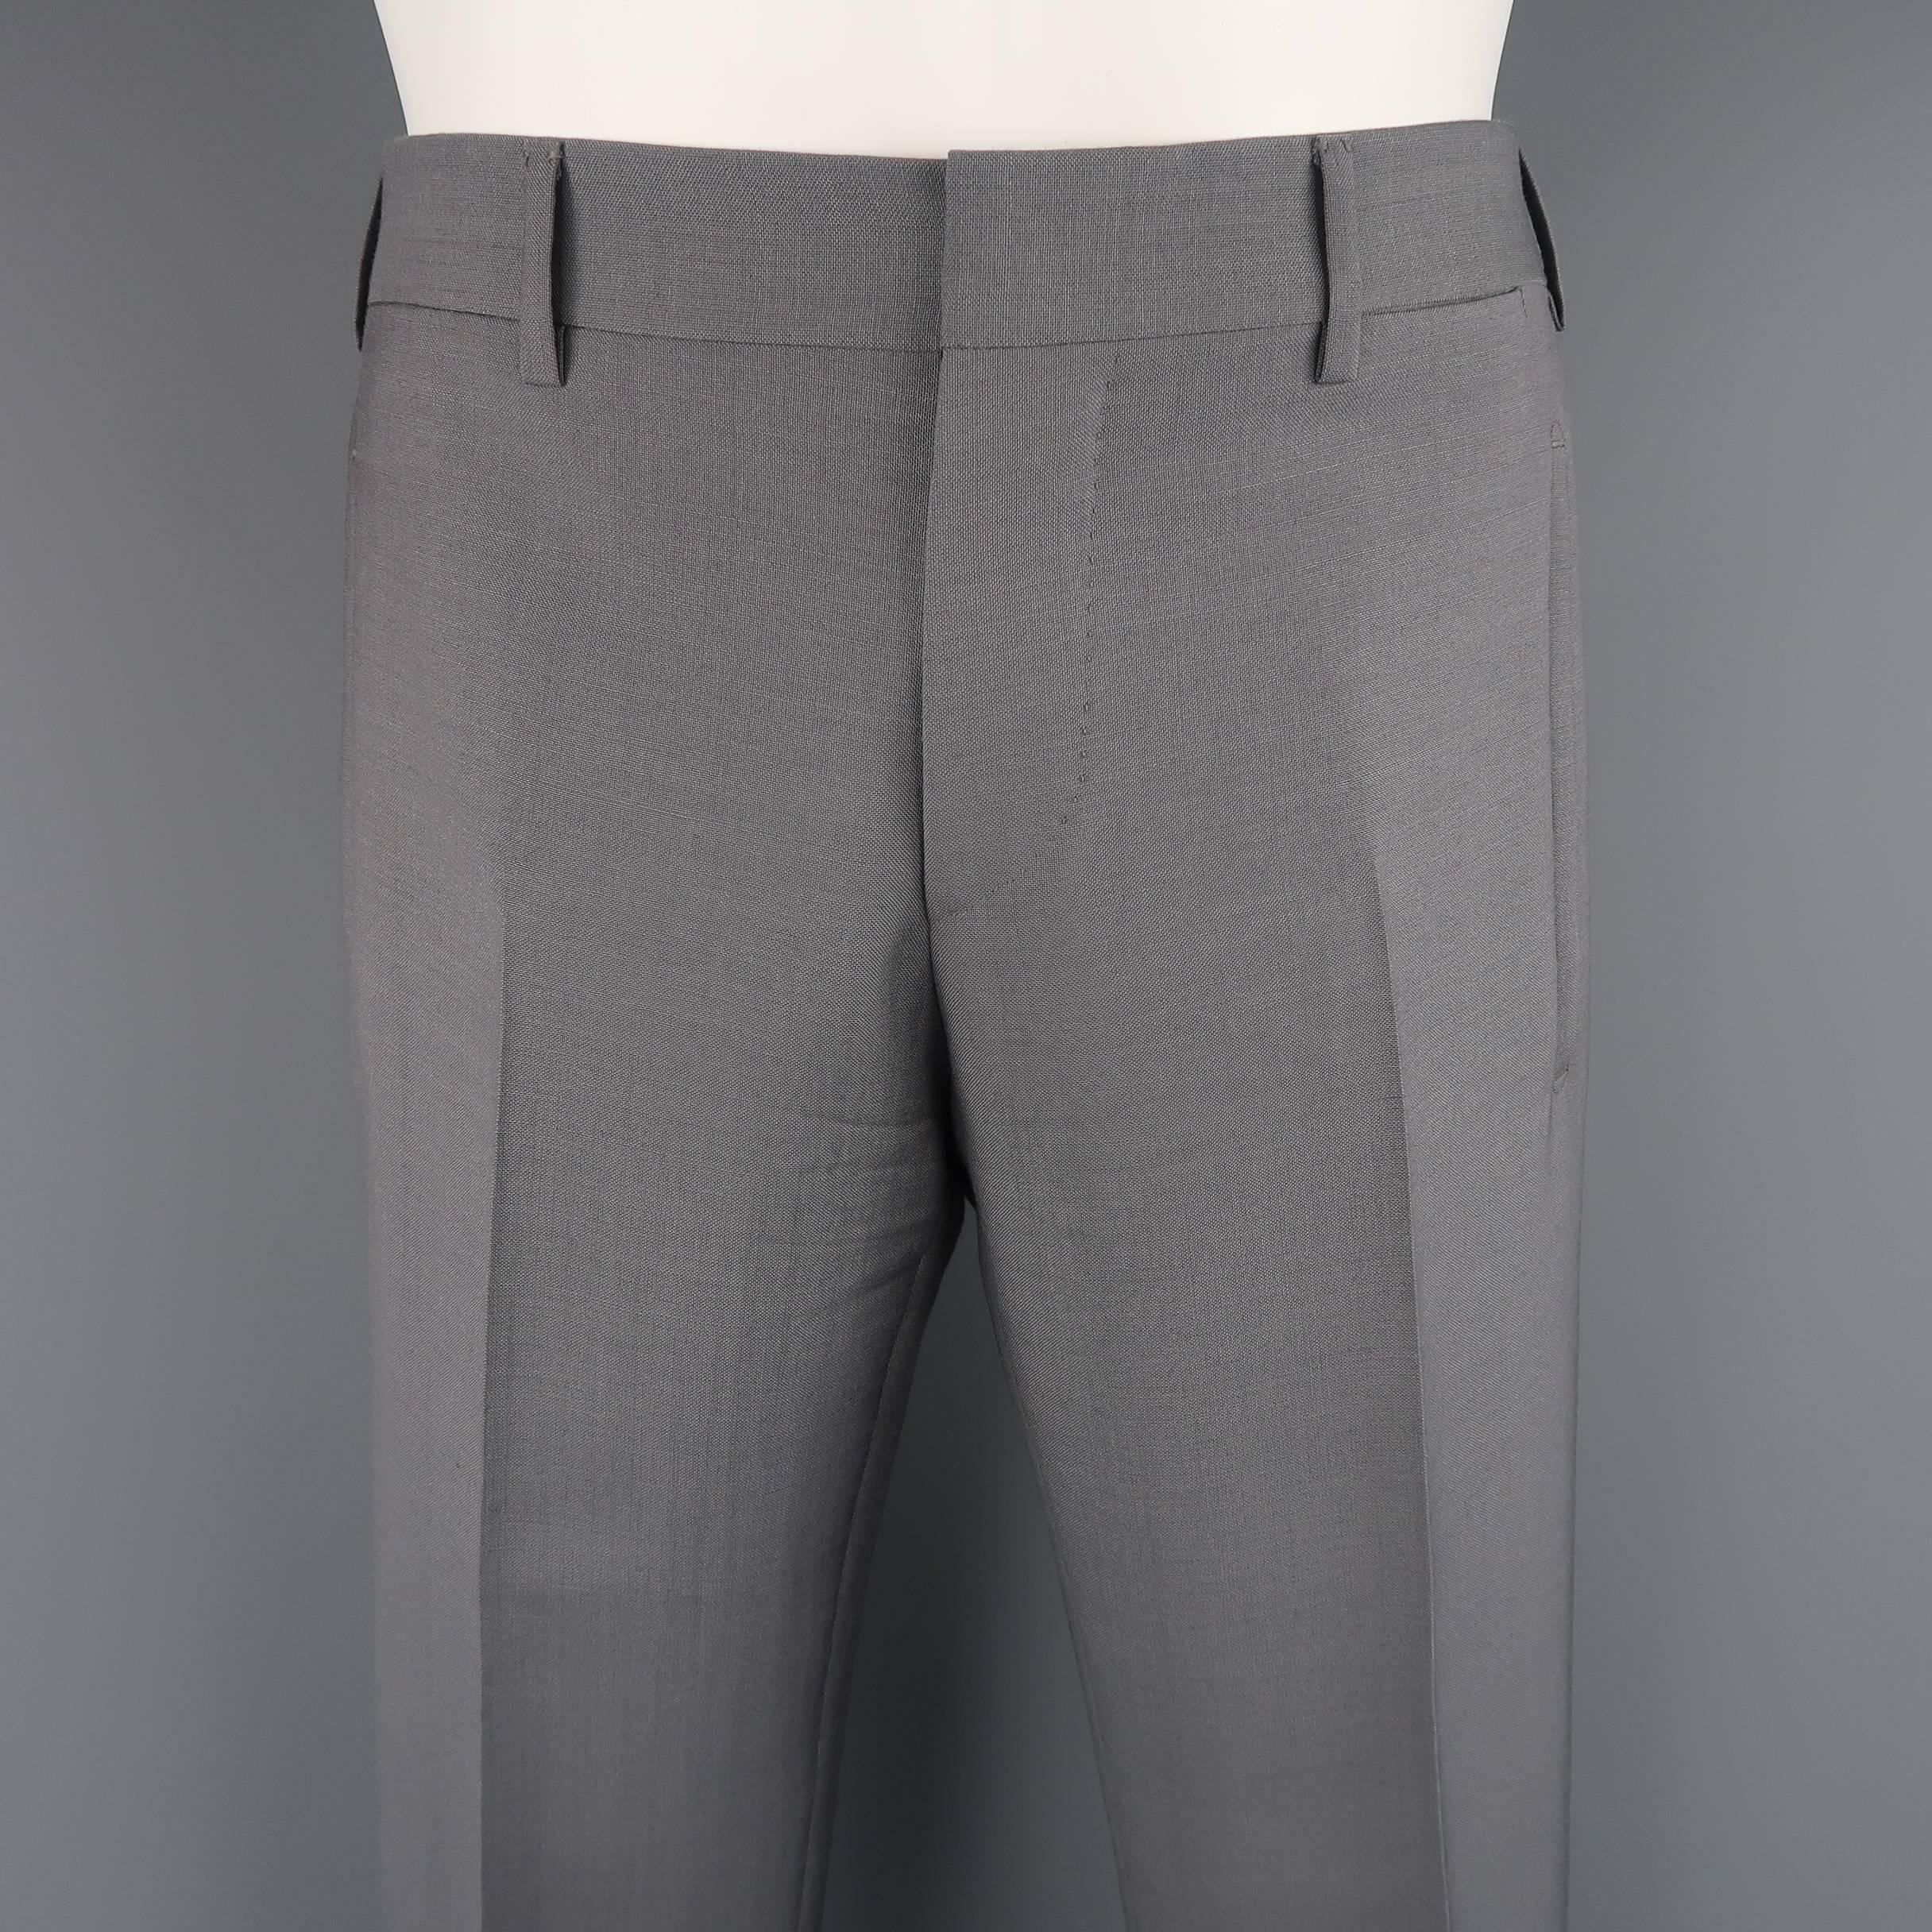 Flat front PRADA pants come in gray mohair wool blend with a slit pockets. Made in Italy
 
Excellent Pre-Owned Condition.
Marked: 46 R
 
Measurements:
 
Waist: 31 in. (+3 in.)
Rise: 8.5 in.
Inseam: 30 in. (+3 in.)
 
(Let Out Room)
